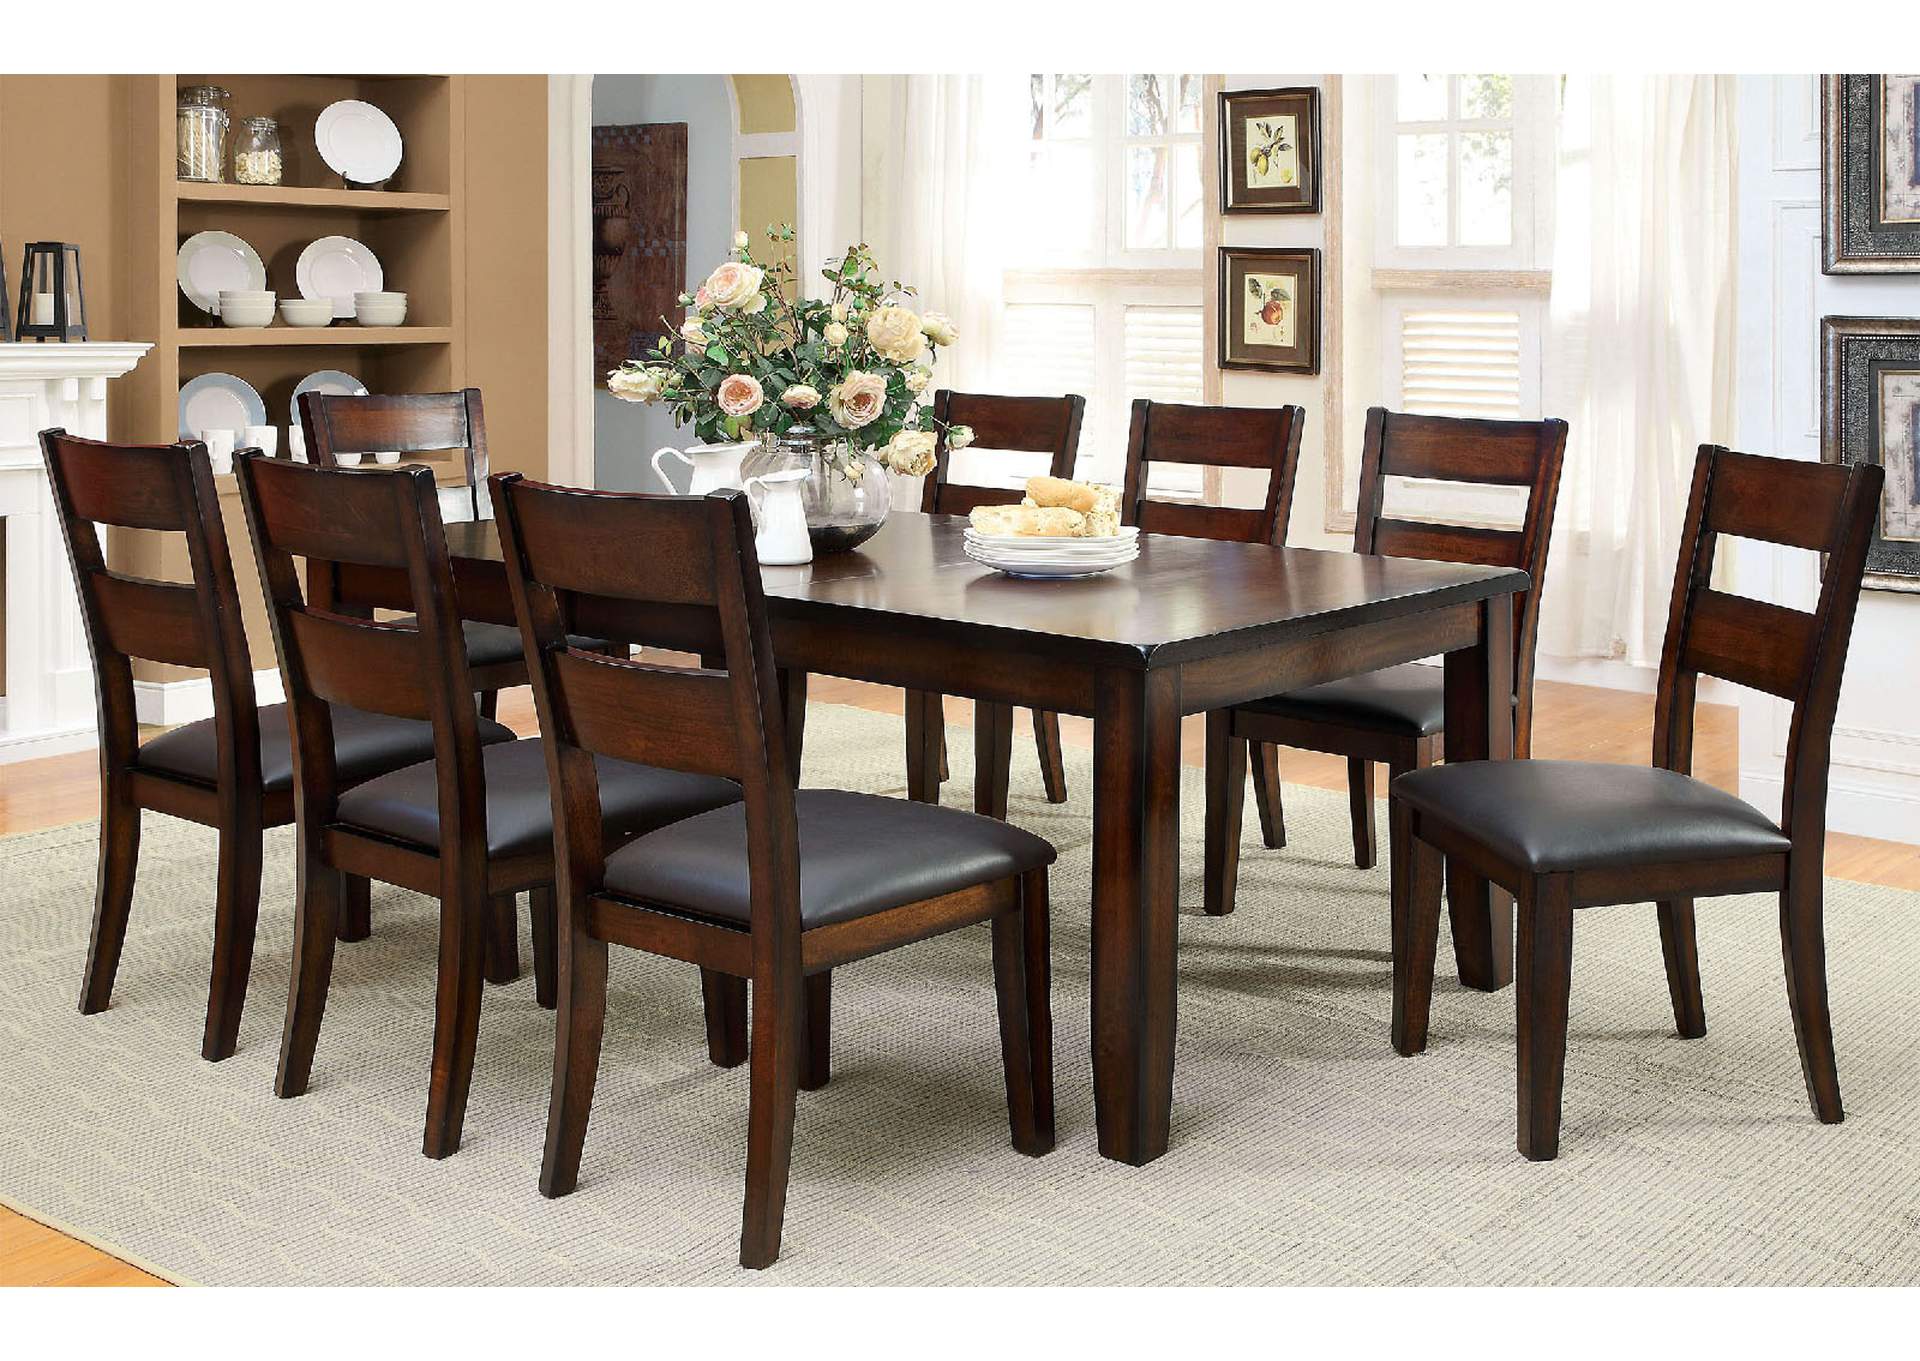 Dickinson Extension Leaf Dining Table w/8 Side Chair,Furniture of America